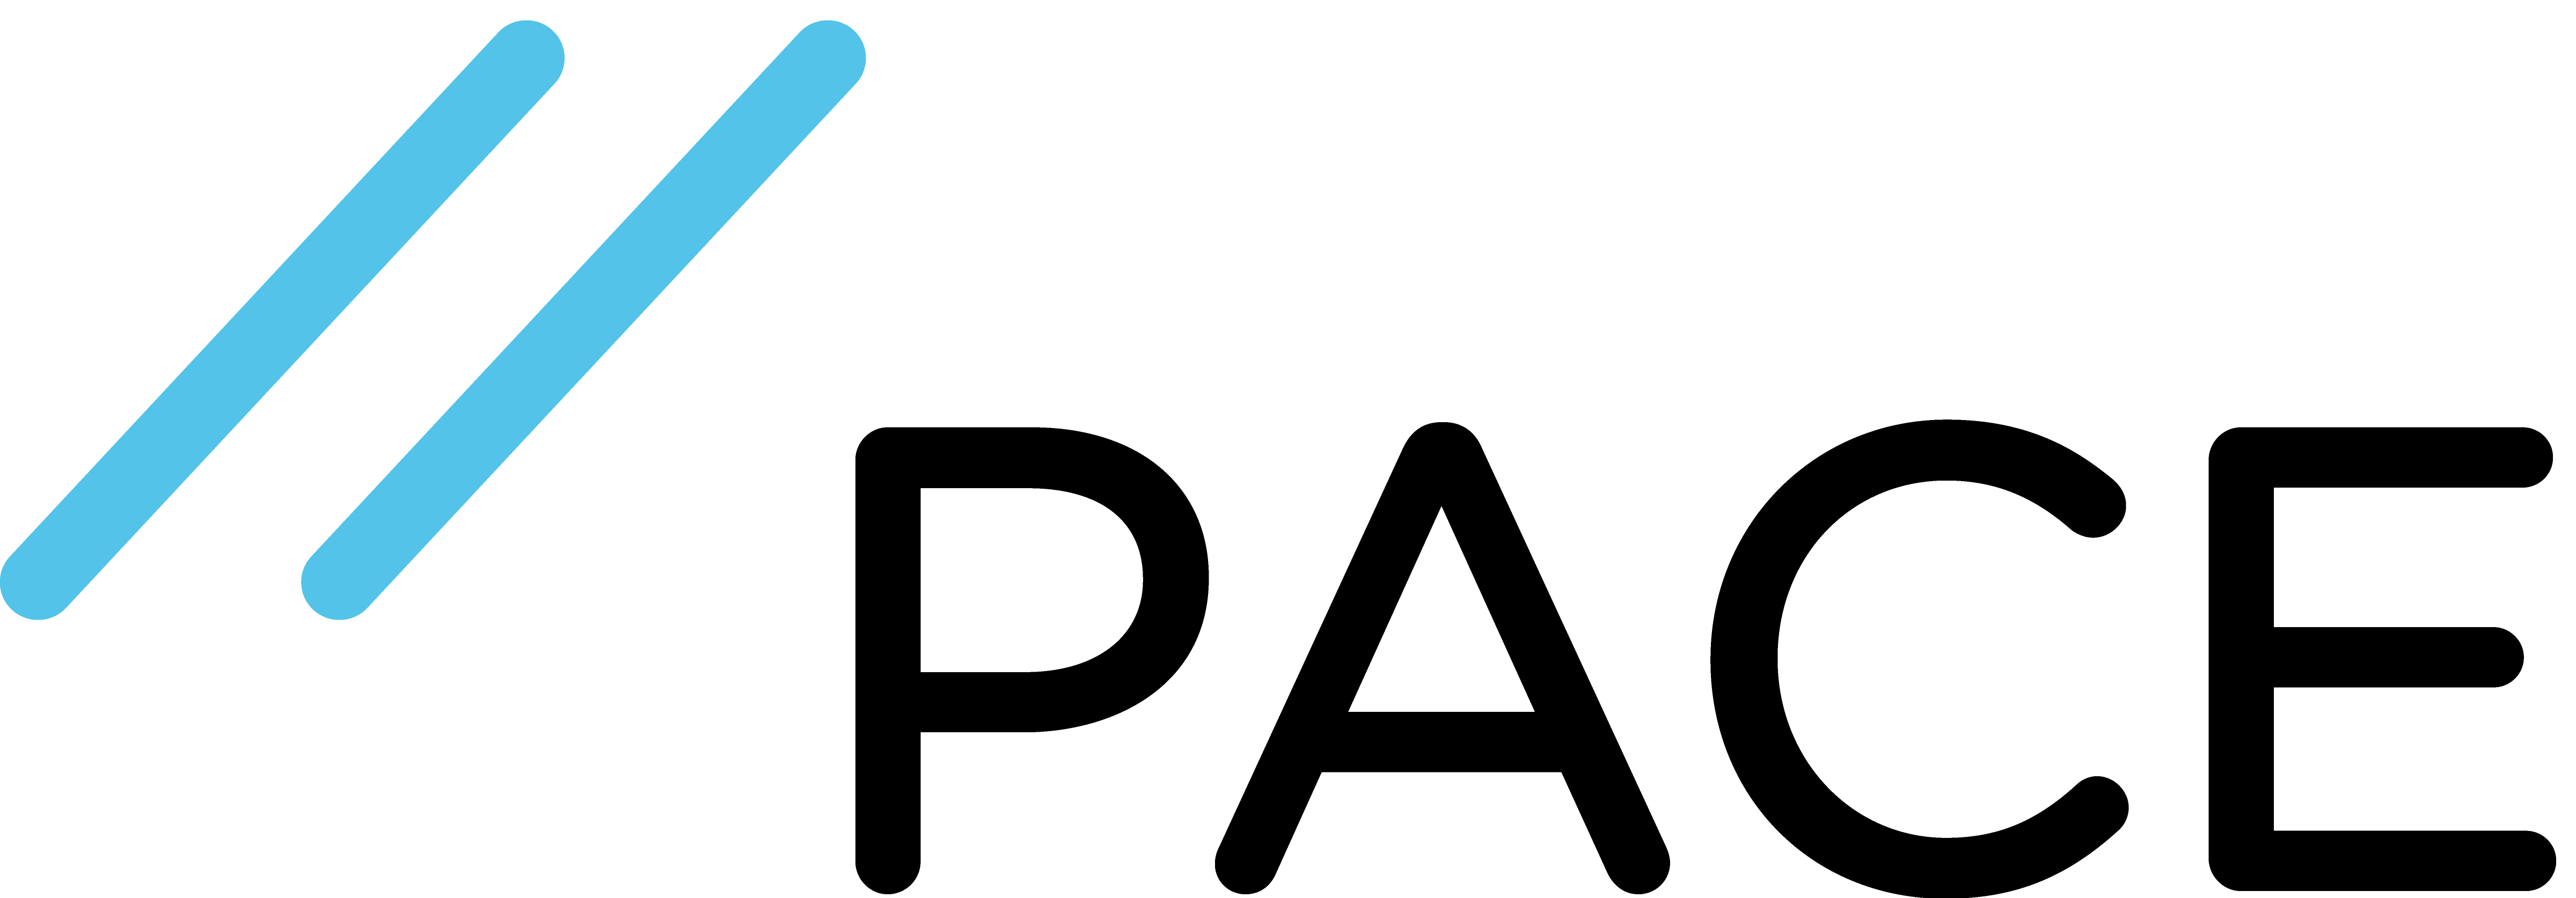 Pace Logo - PACE logos and brand information | PACE press section